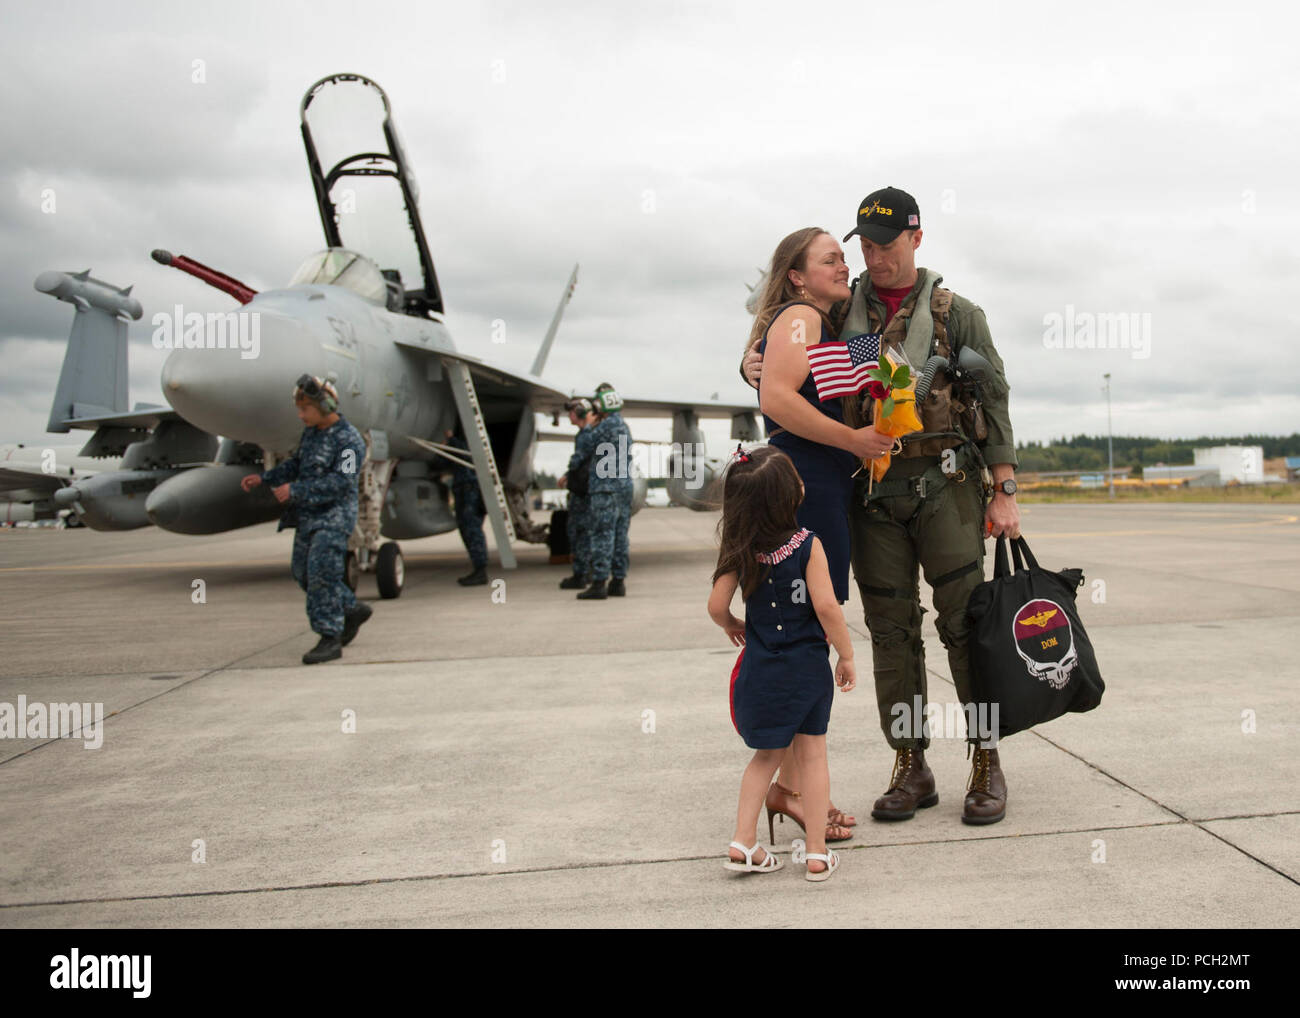 OAK HARBOR, Wash. (Aug. 9, 2016) Lt. Erik Dippold, a Navy pilot assigned to EA-18G Growler Airborne Electronic Attack Aircraft with Electronic Attack Squadron (VAQ) 133 is welcomed home by his wife and daughter at Naval Air Station Whidbey Island. VAQ-133 conducted an eight-month, regularly scheduled, 7th Fleet deployment aboard the USS John C. Stennis (CVN 74) supporting stability in the Indo-Asia-Pacific. Stock Photo